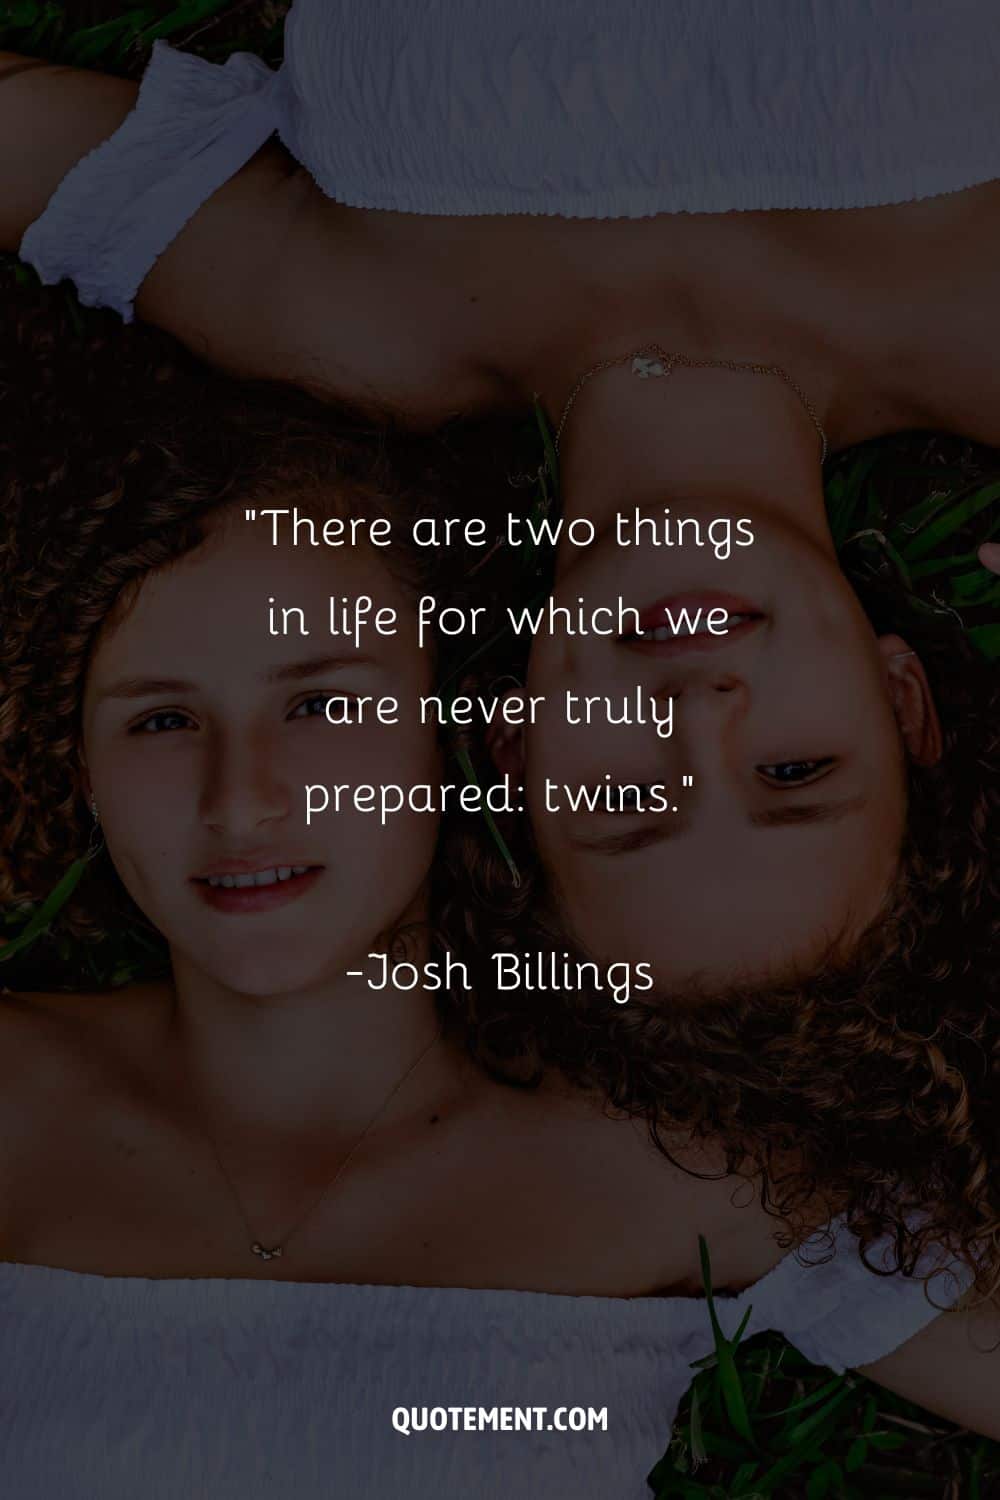 “There are two things in life for which we are never truly prepared twins.” – Josh Billings